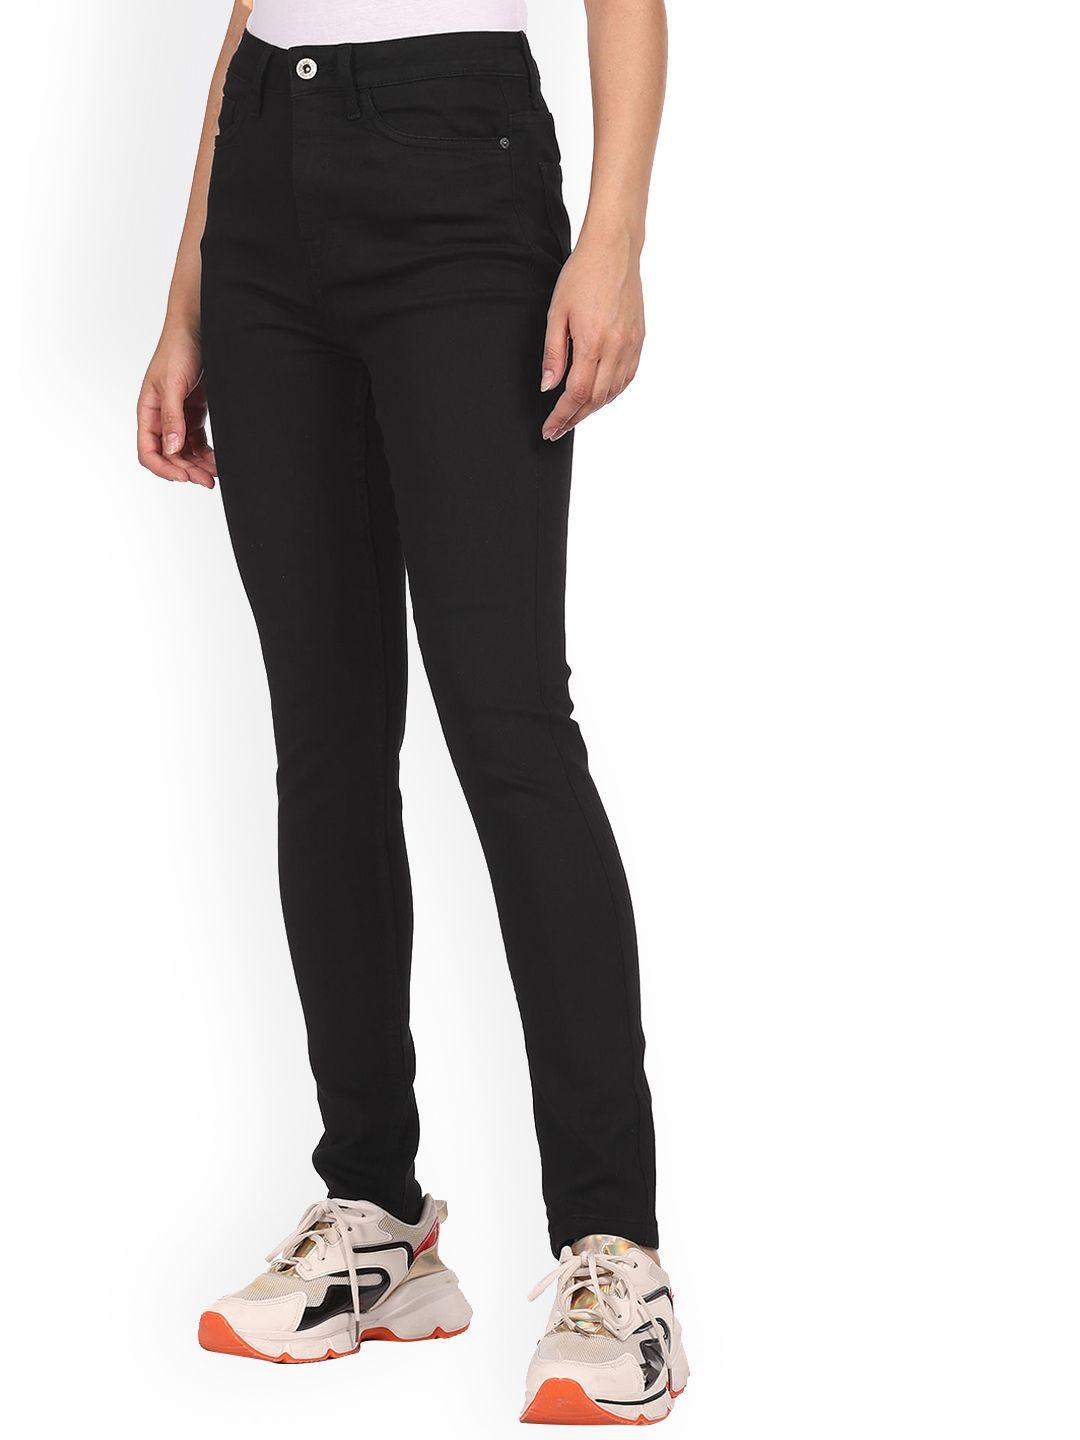 sugr women black solid mid rise clean look jeans